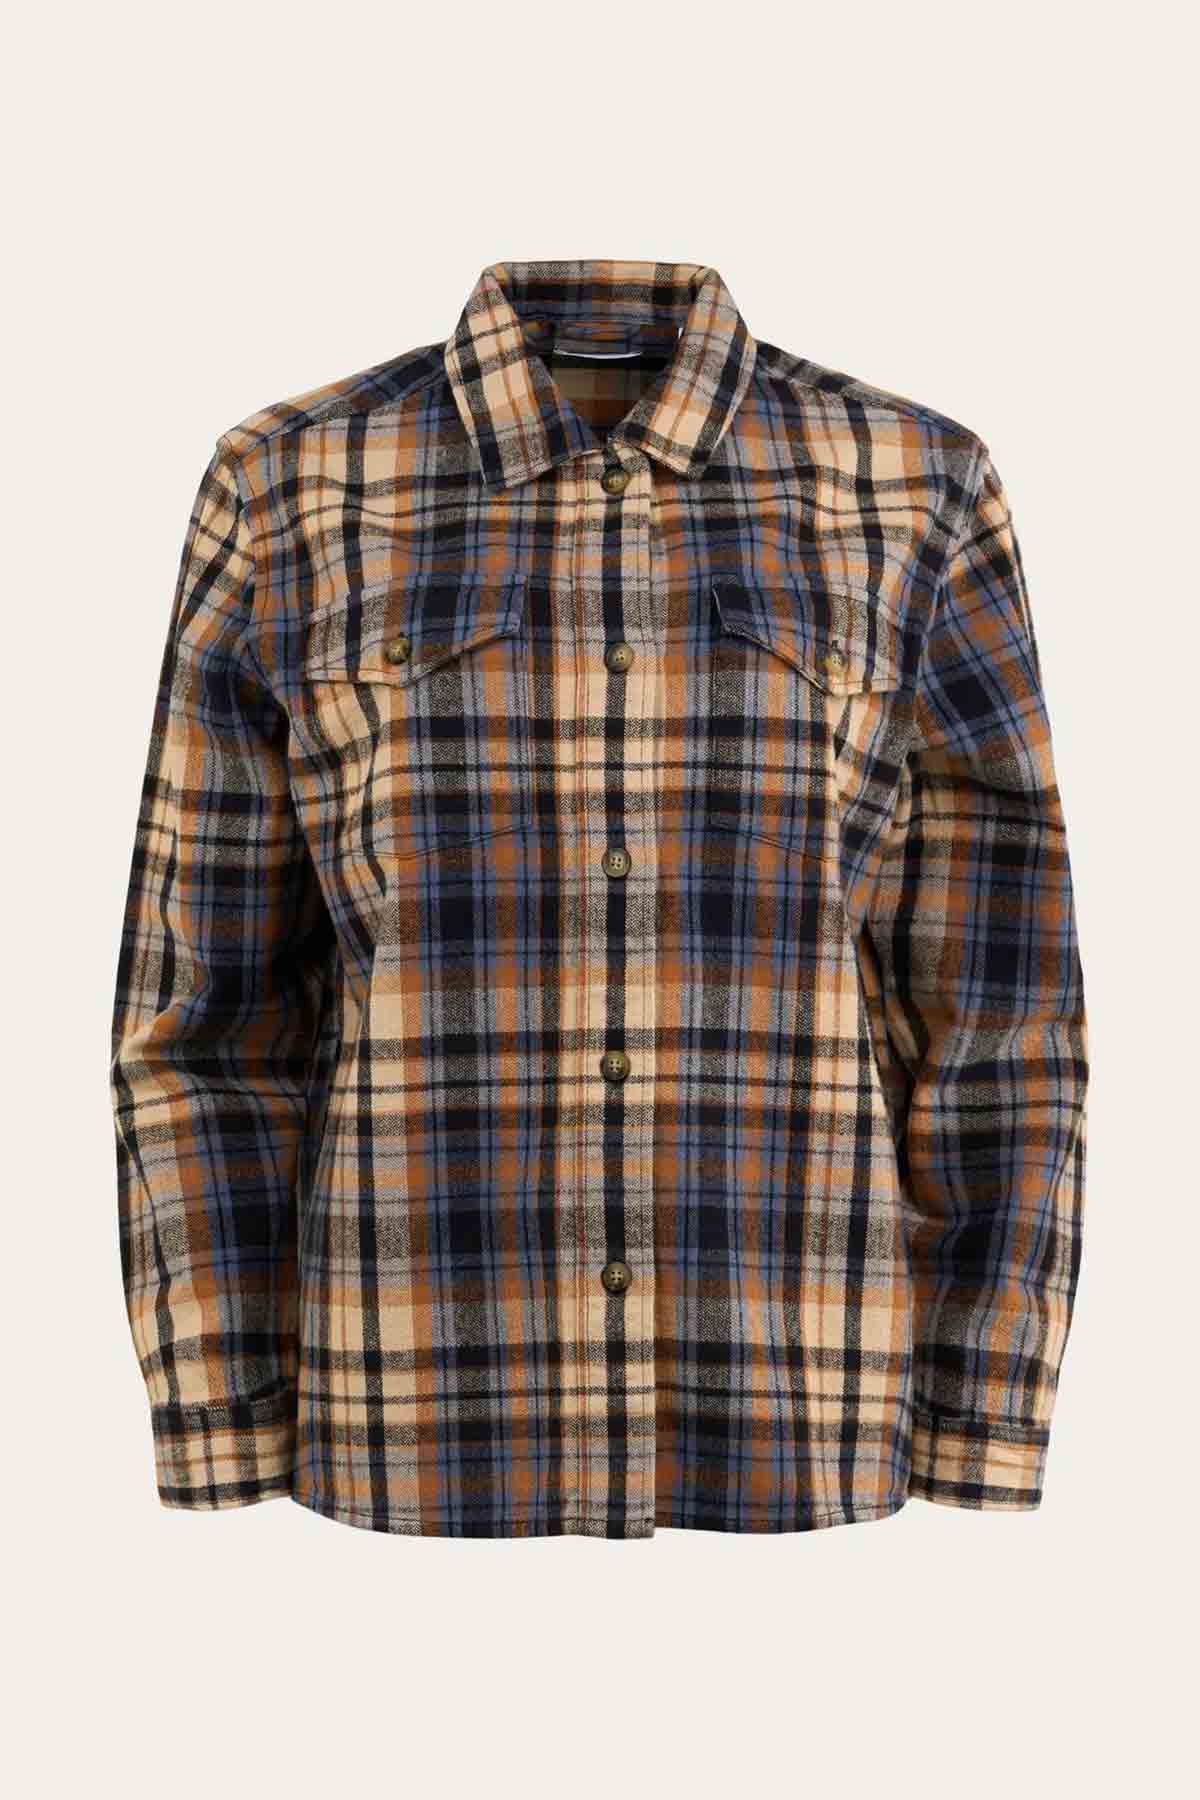 Chemise Earth Colors Checkred - Knowledge Cotton Apparel